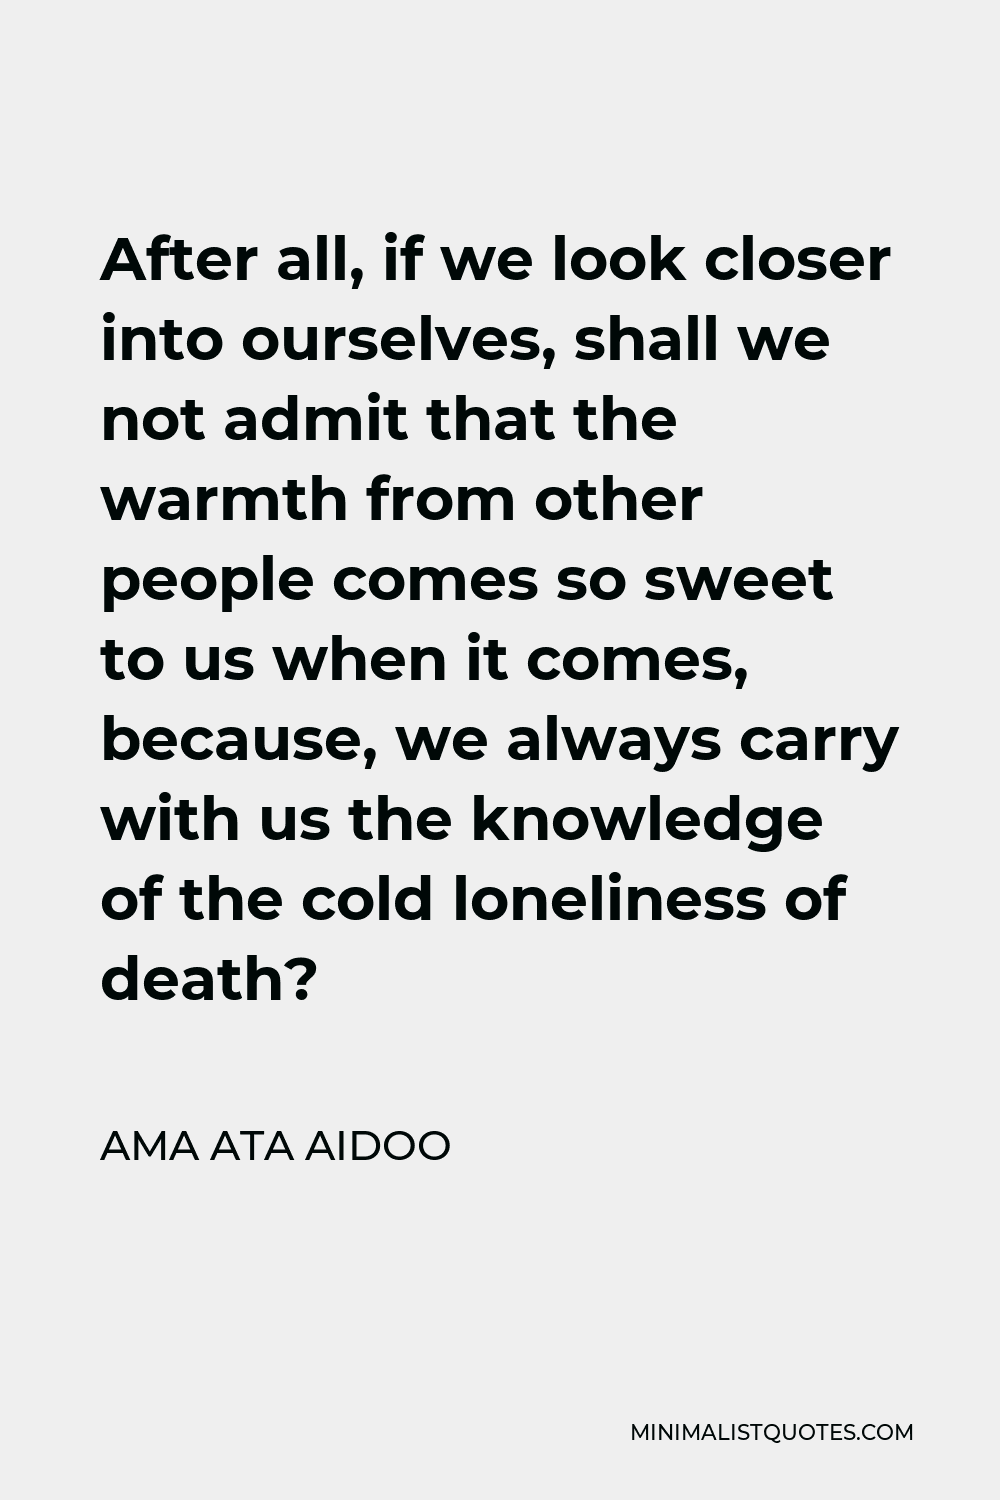 Ama Ata Aidoo Quote - After all, if we look closer into ourselves, shall we not admit that the warmth from other people comes so sweet to us when it comes, because, we always carry with us the knowledge of the cold loneliness of death?